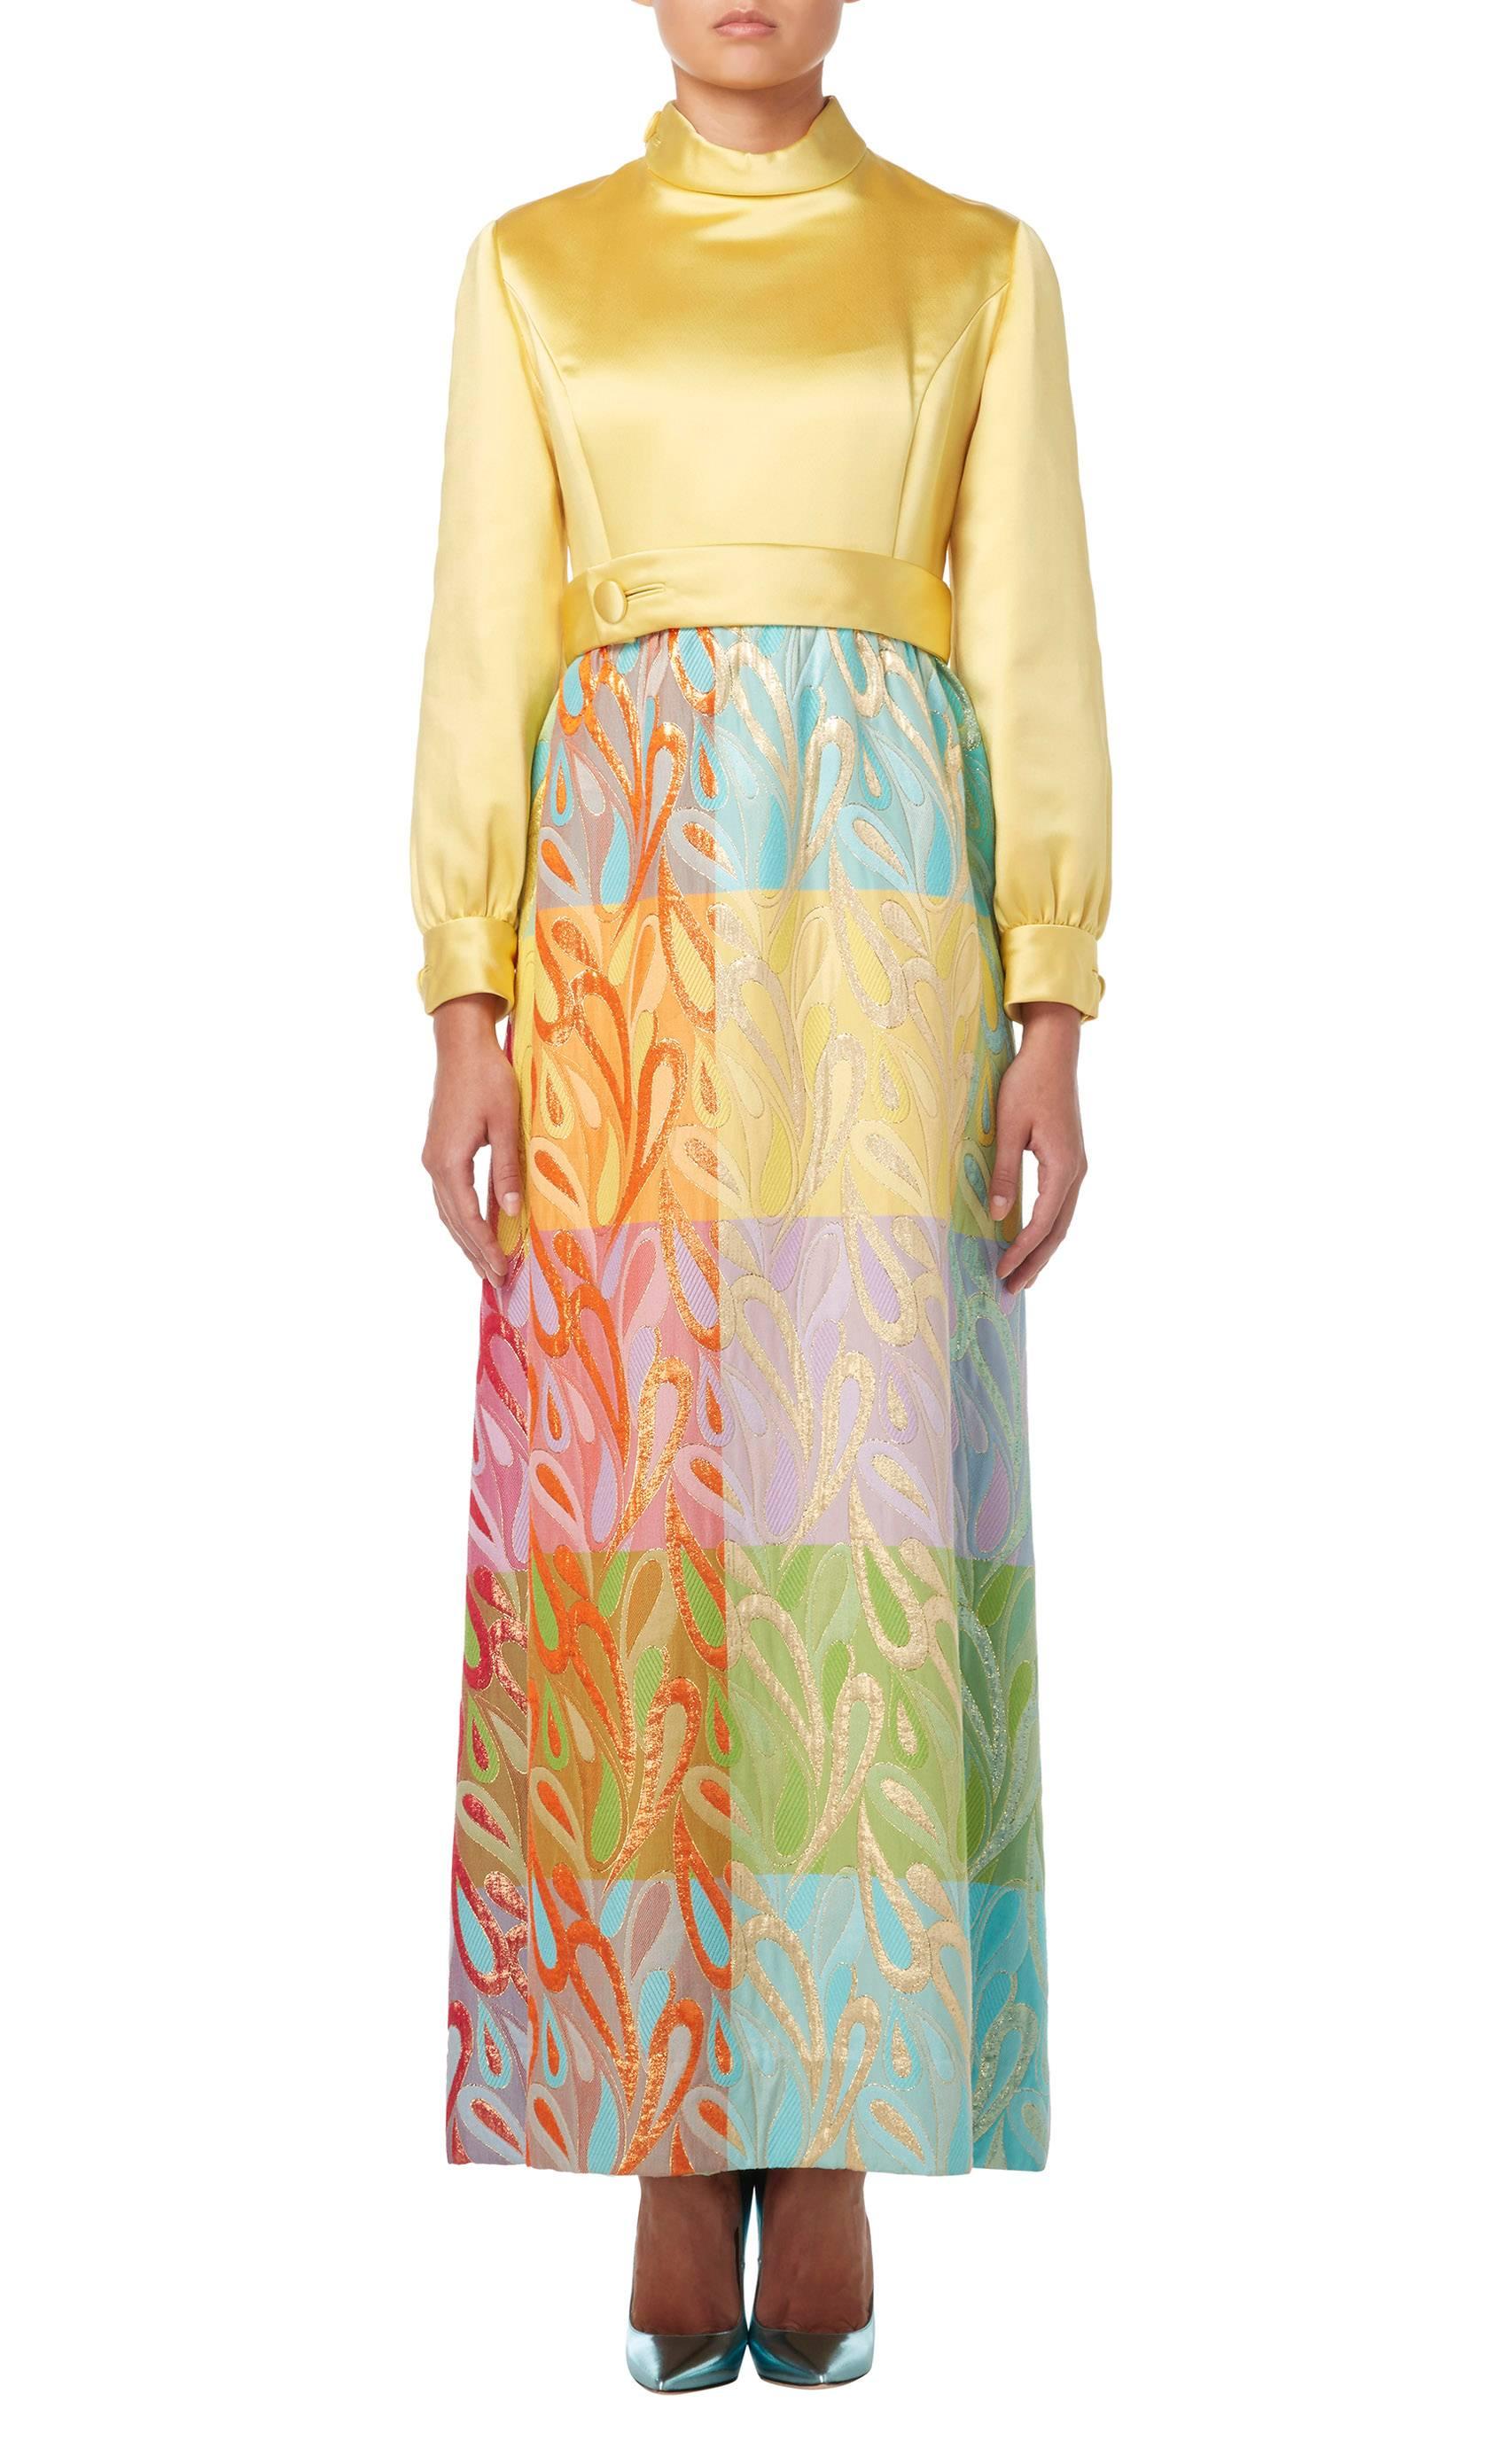 Featuring a sorbet yellow top constructed in luxuriously thick silk and a spectacular contrasting silk lurex full skirt in a warm and acidic colour-way, this Malcolm Starr dress artfully crafts hot colours in a winter weight. Detailing fabric